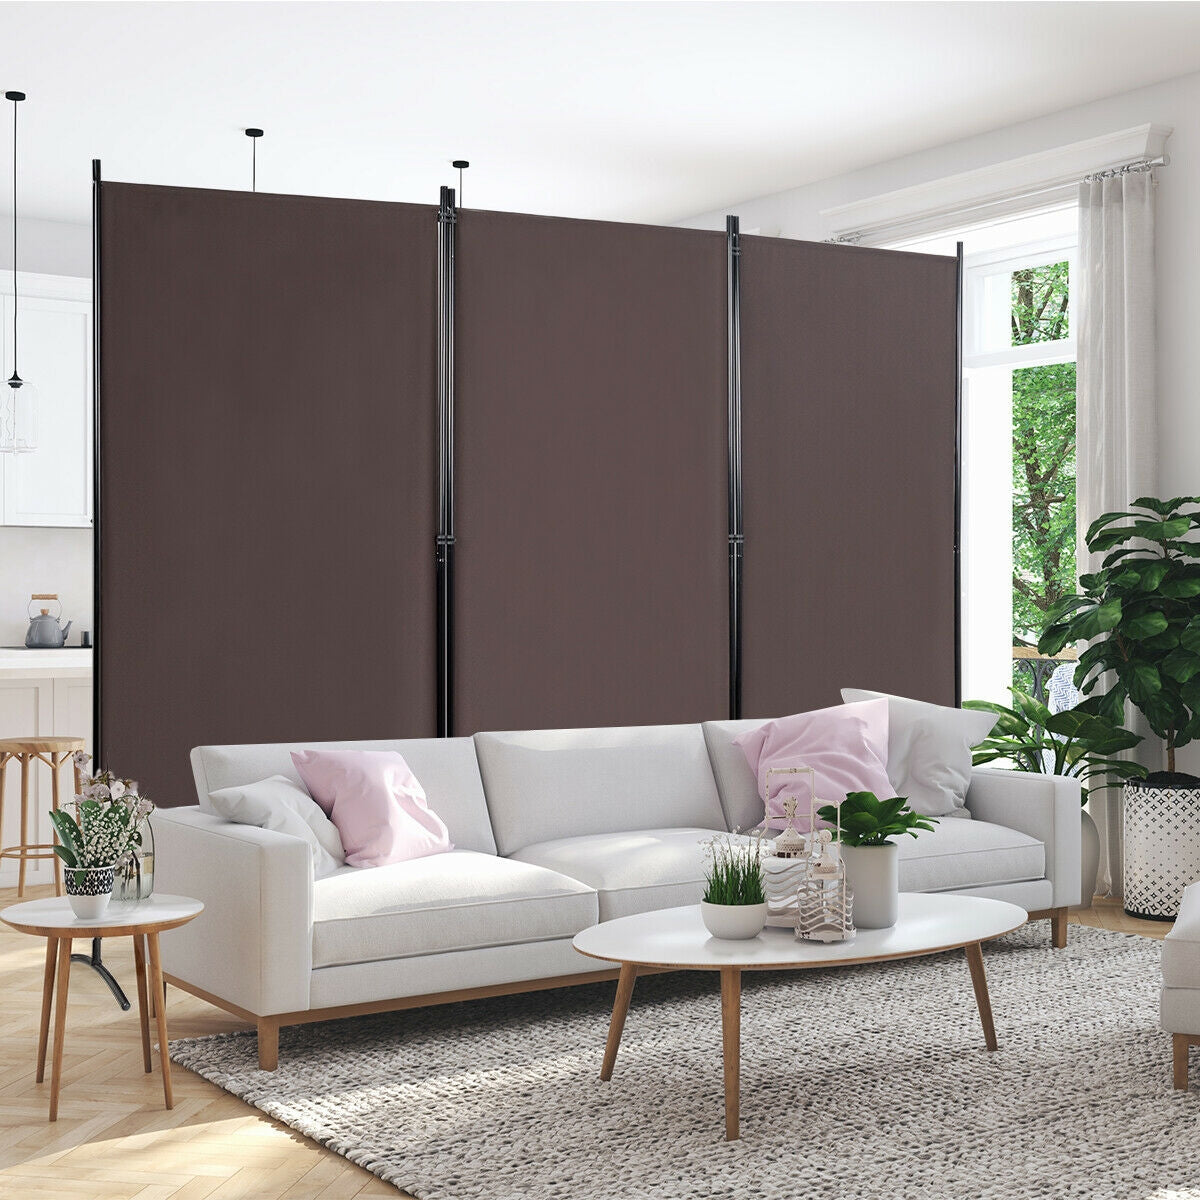 3-Panel Room Divider Folding Privacy Partition Screen for Office Room-Brown